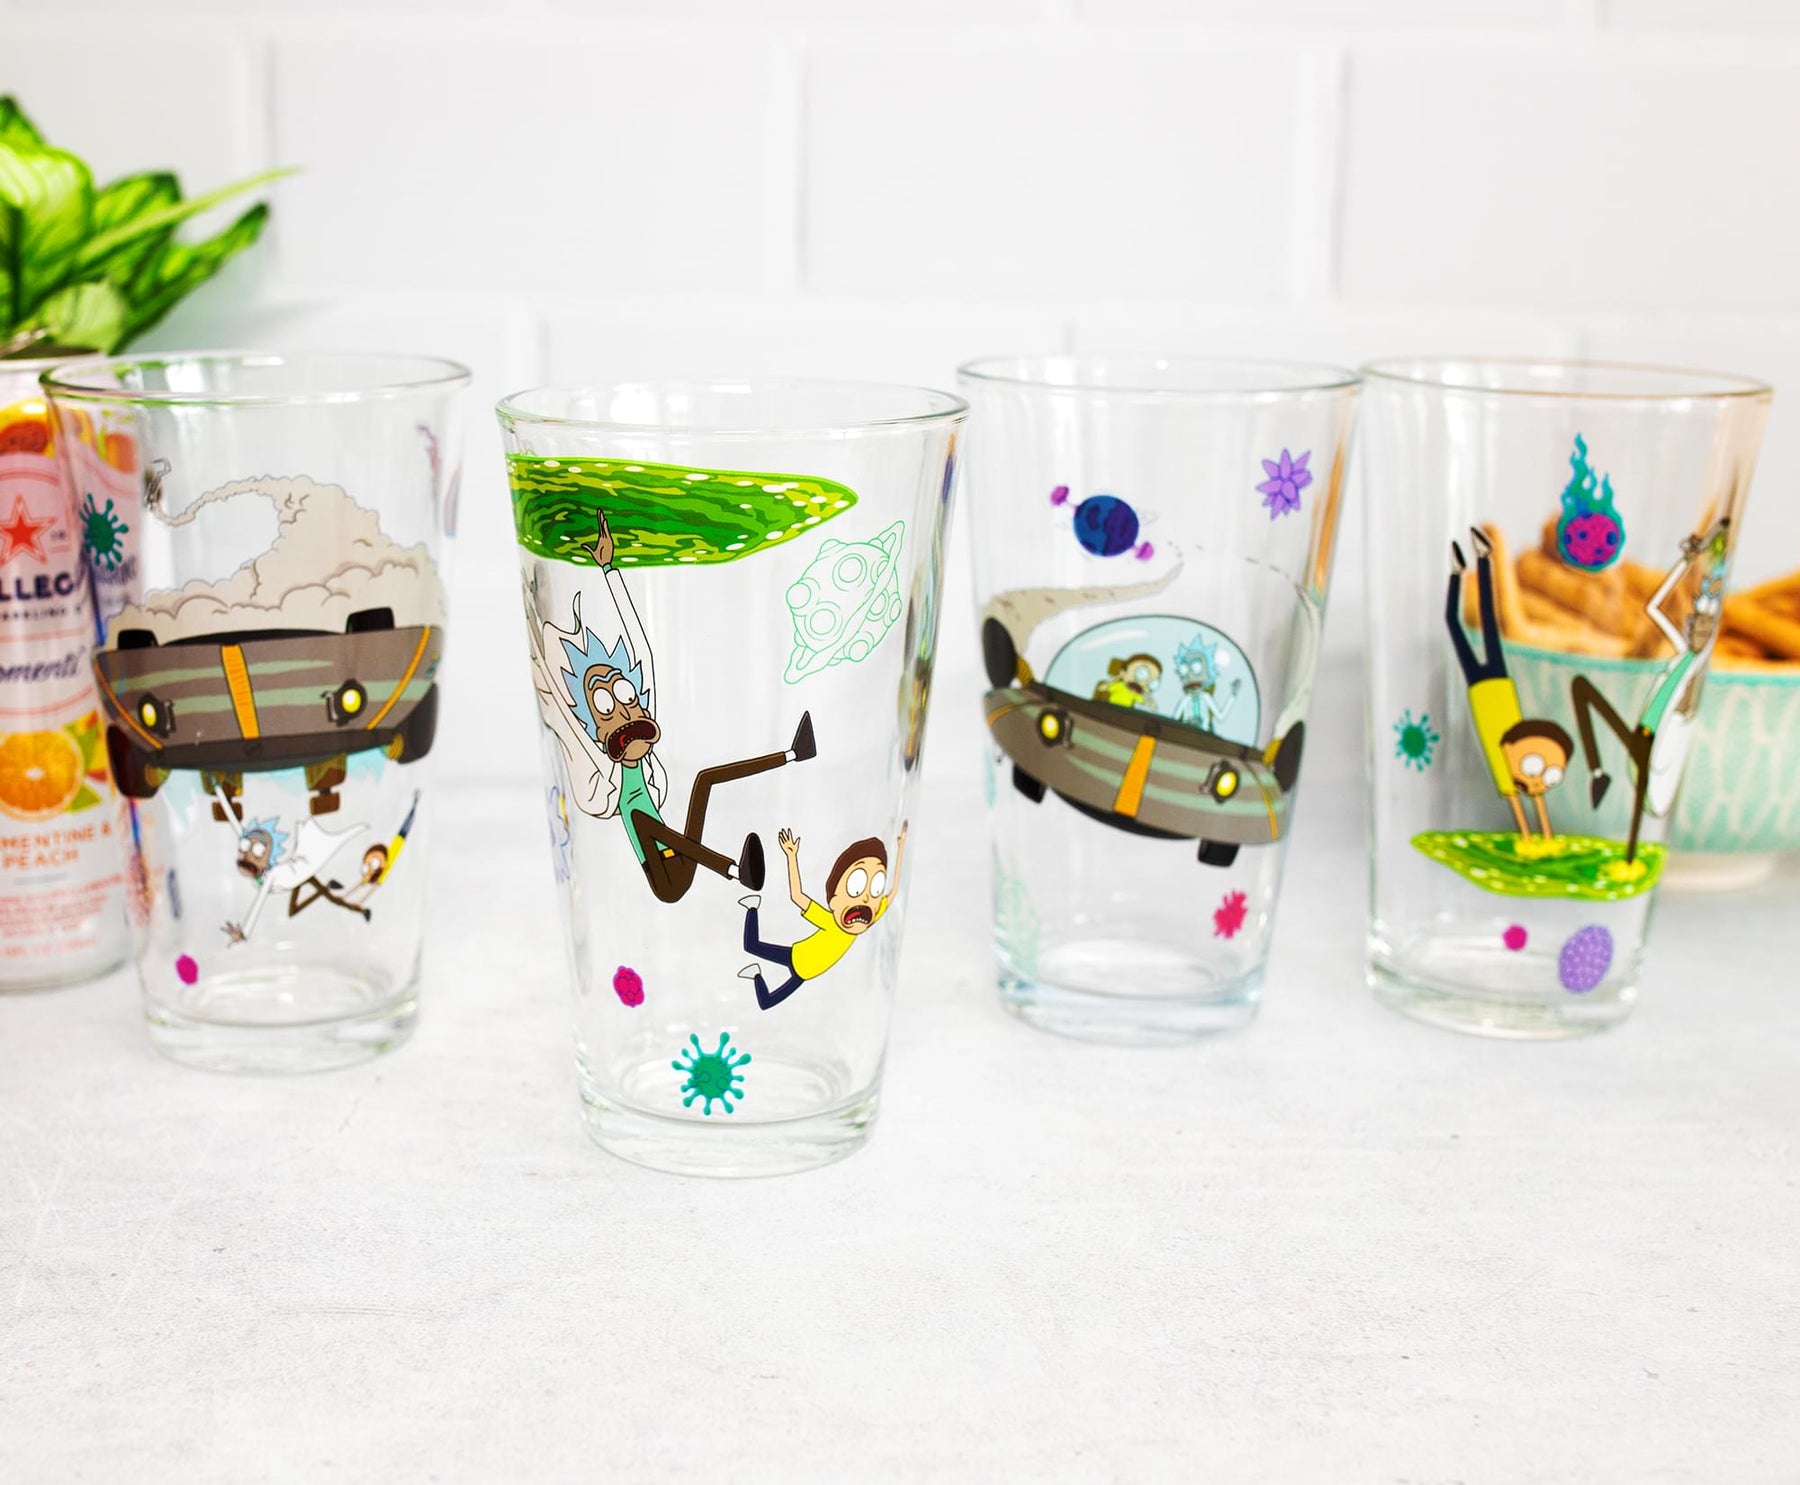 Rick and Morty 16-Ounce Pint Glasses | Set of 4